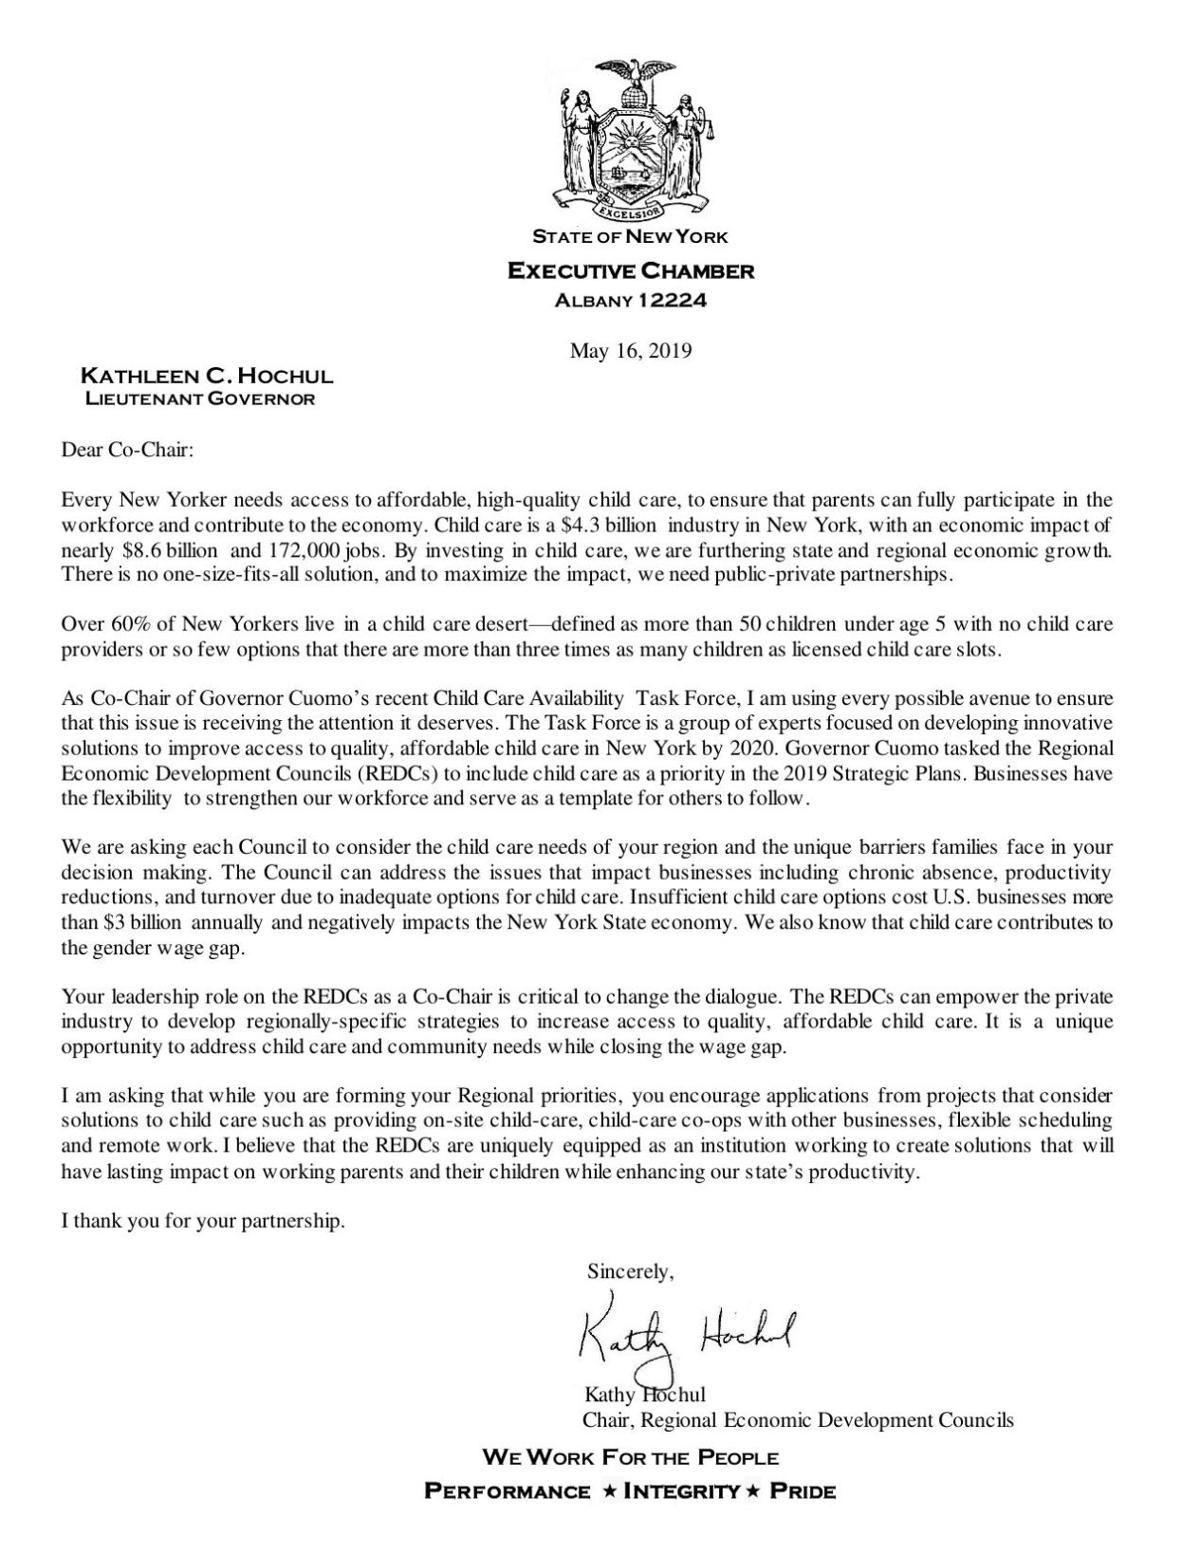 Hochul REDC letter